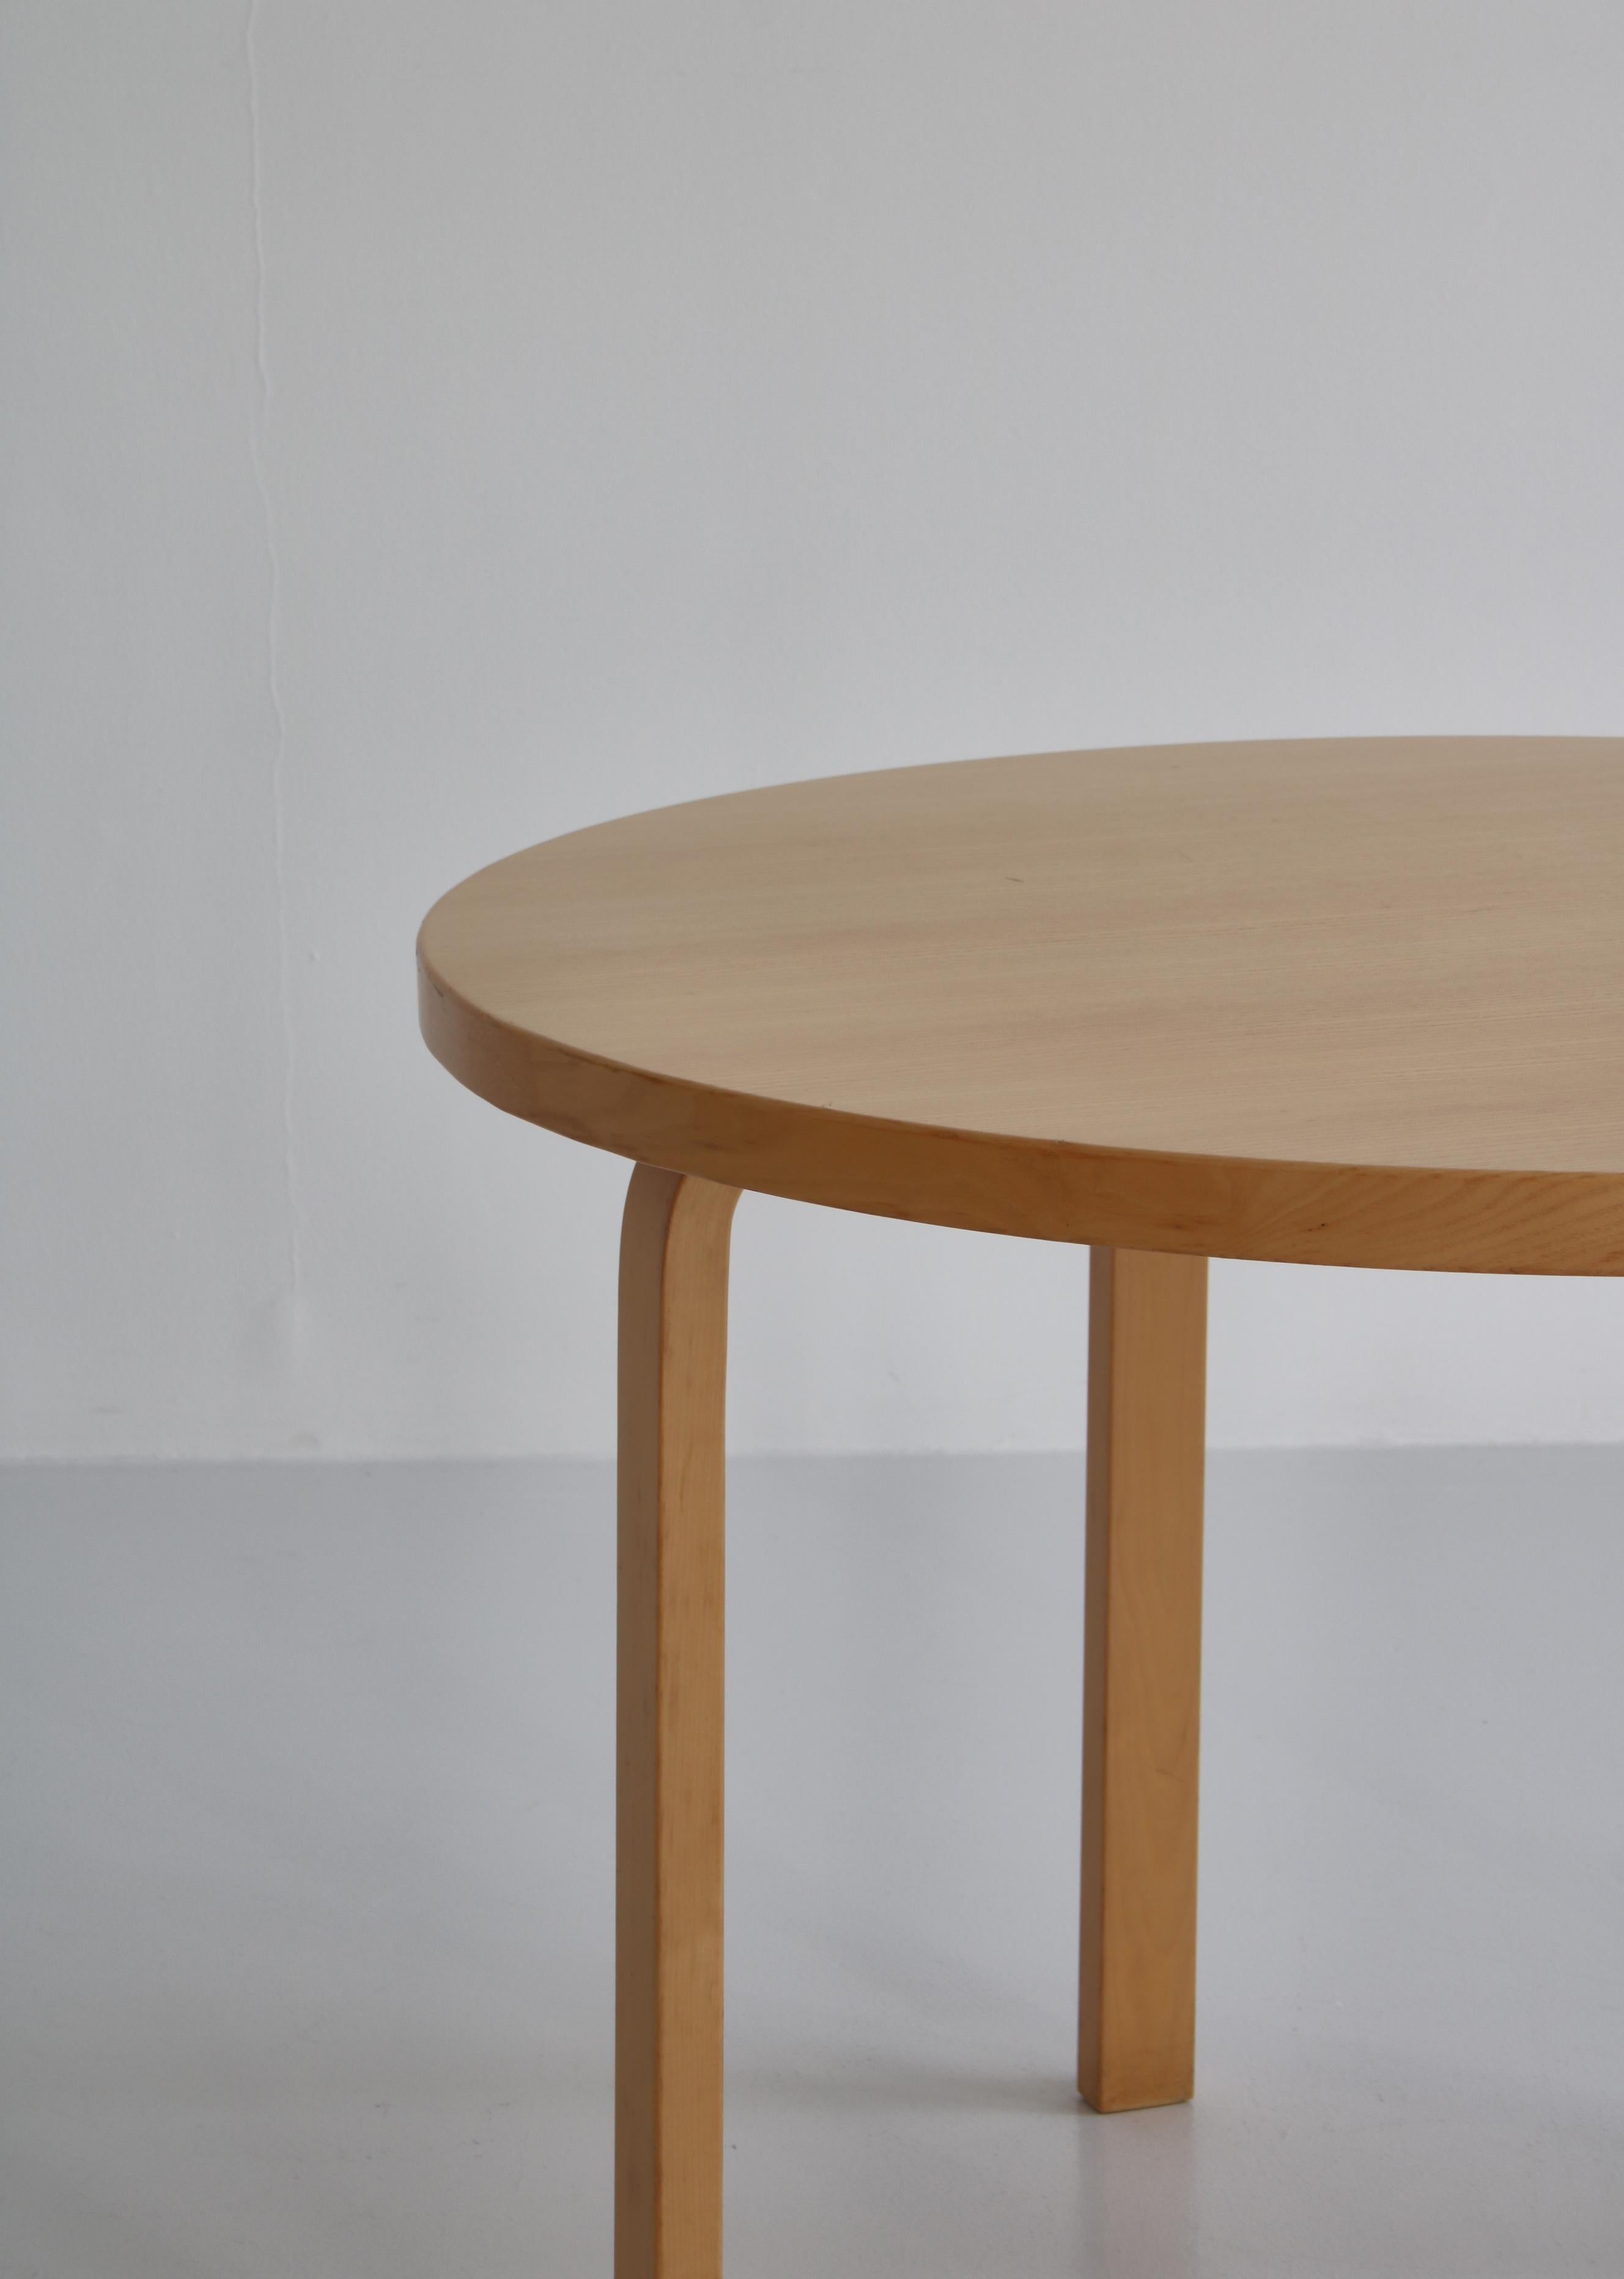 Late 20th Century Alvar Aalto Dining Table Model No. 91 in Ash at Artek, Finland in the 1970s